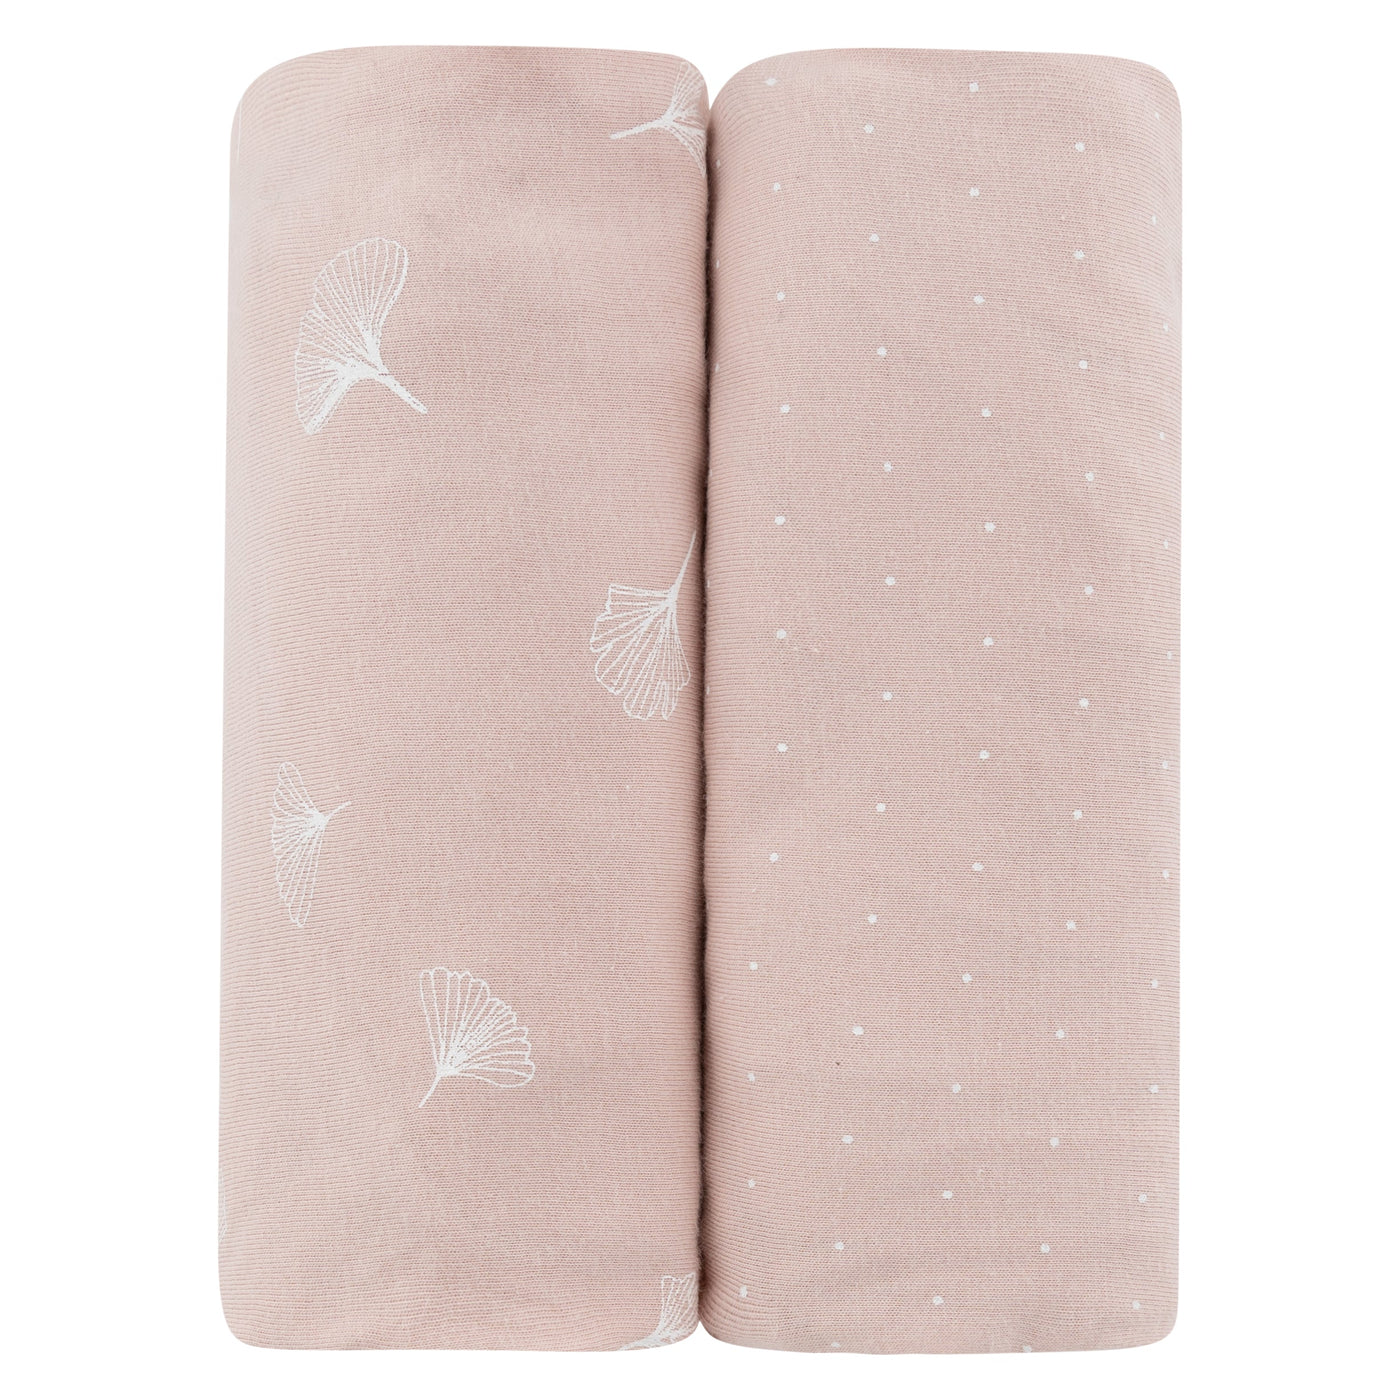 Ely's & Co. Two Pack Crib Sheets - Gingko Collection Pink